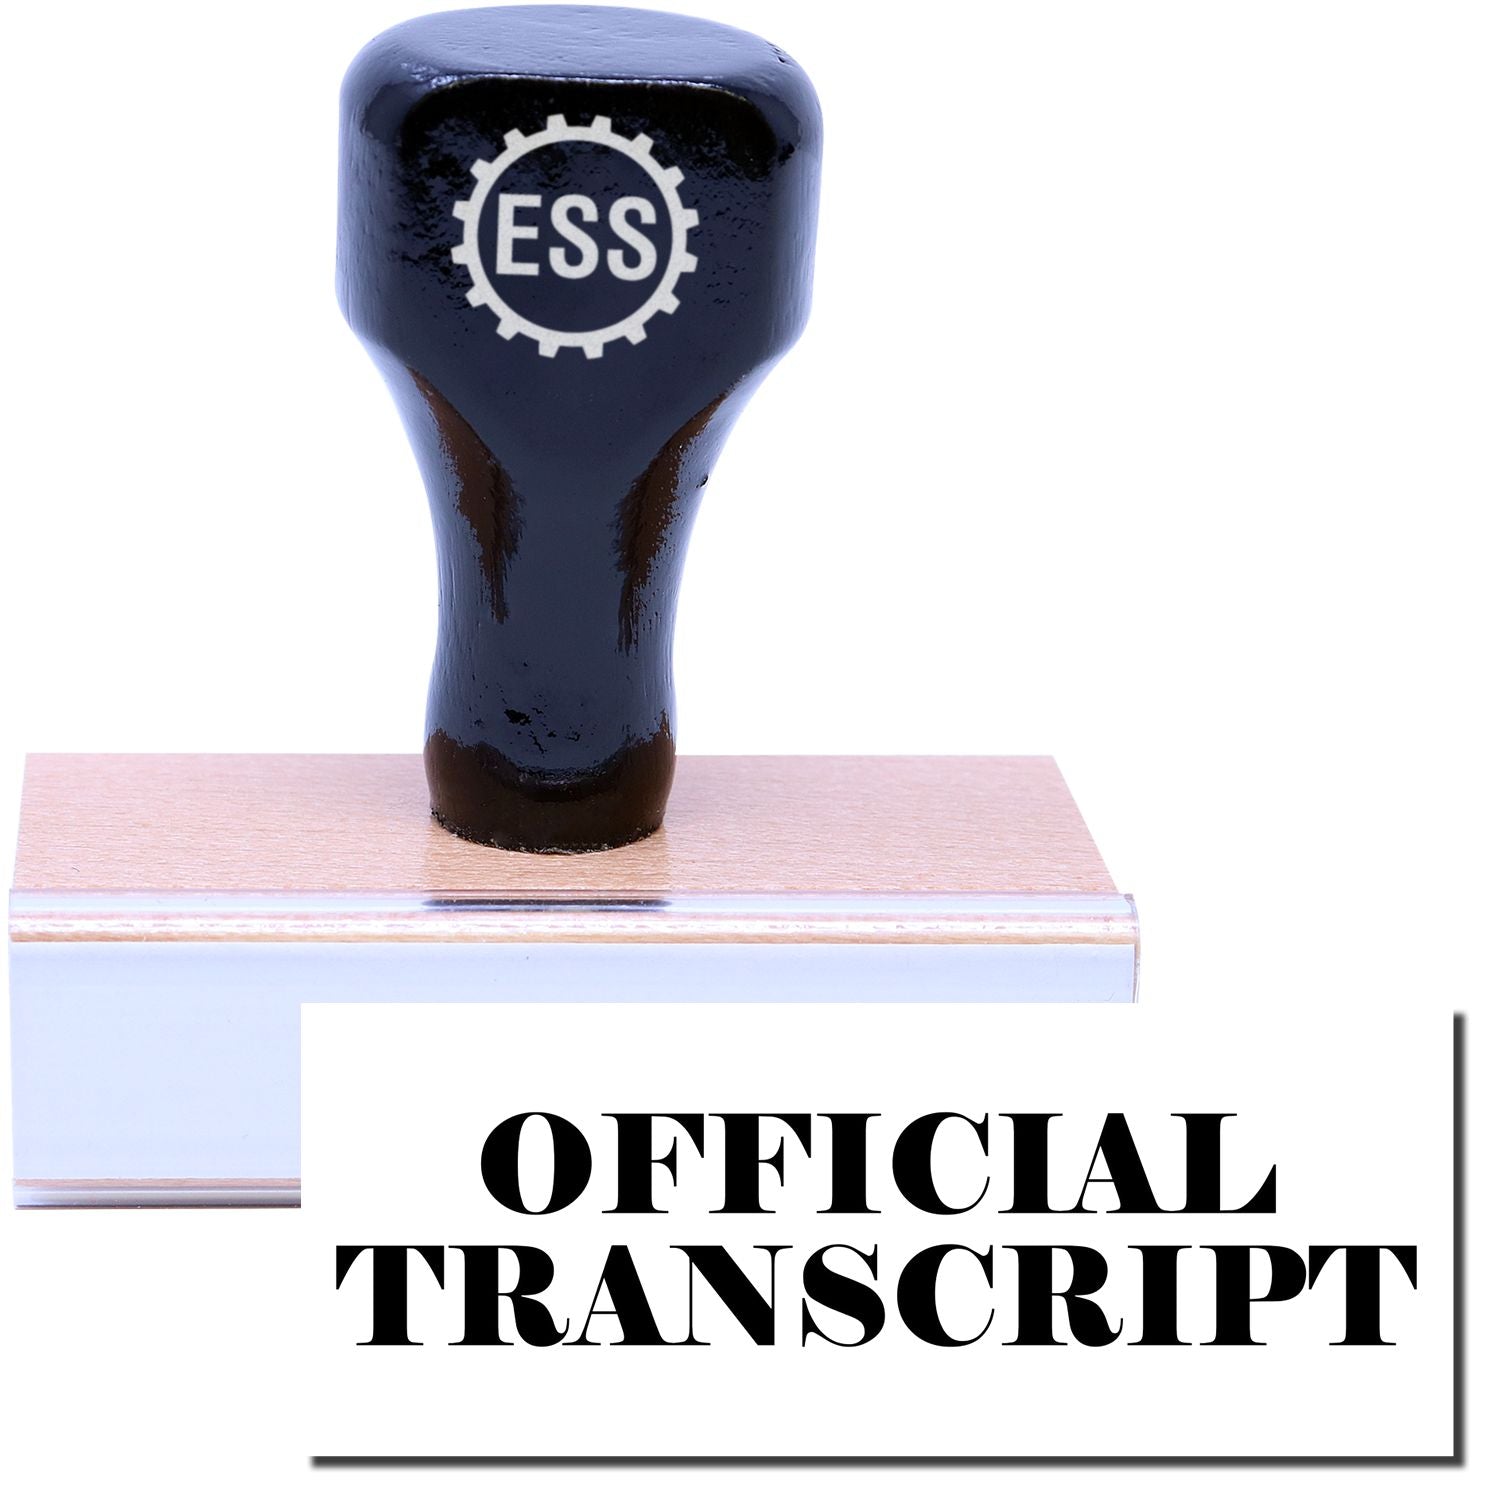 A stock office rubber stamp with a stamped image showing how the text "OFFICIAL TRANSCRIPT" in a large font is displayed after stamping.